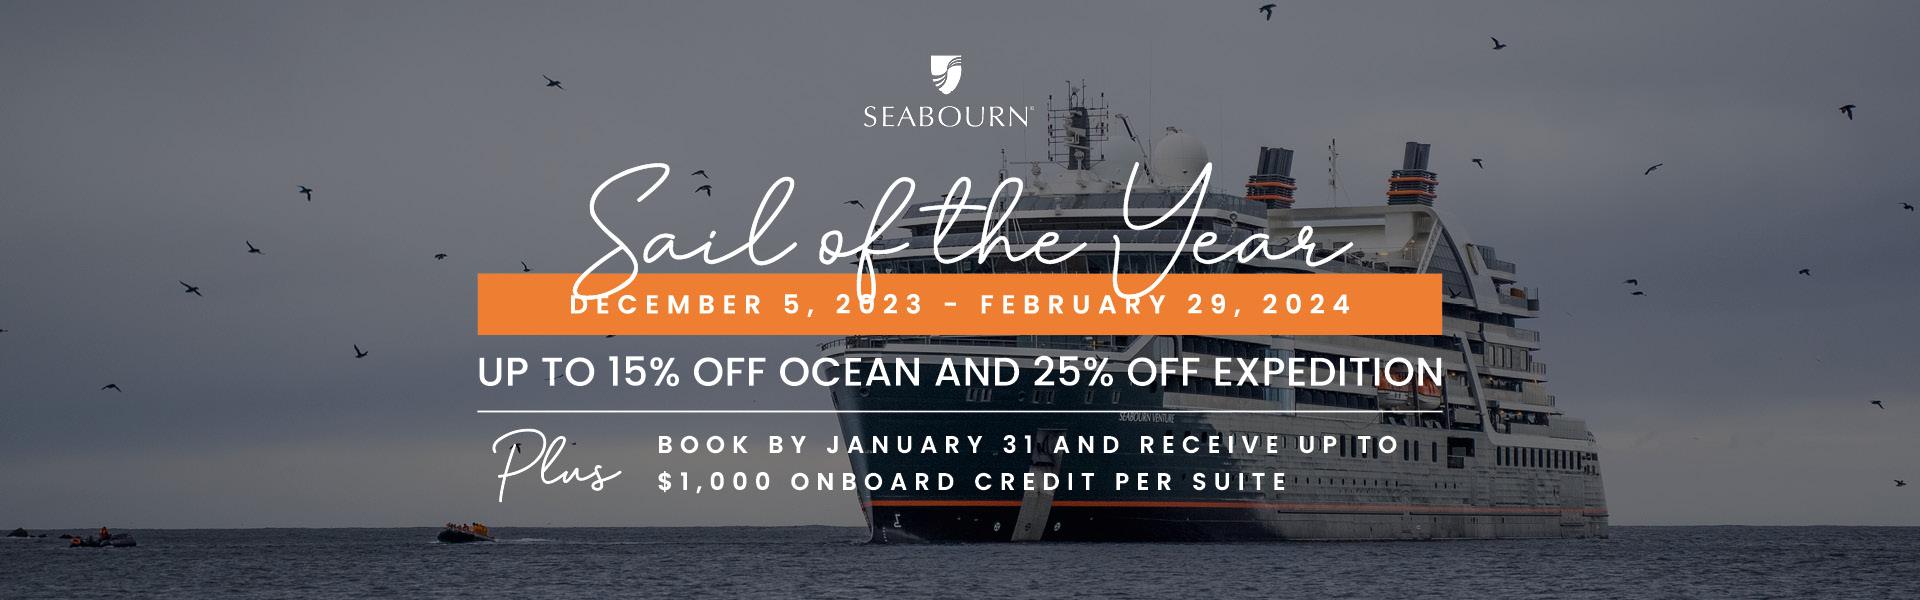 Seabourn Sail of the Year